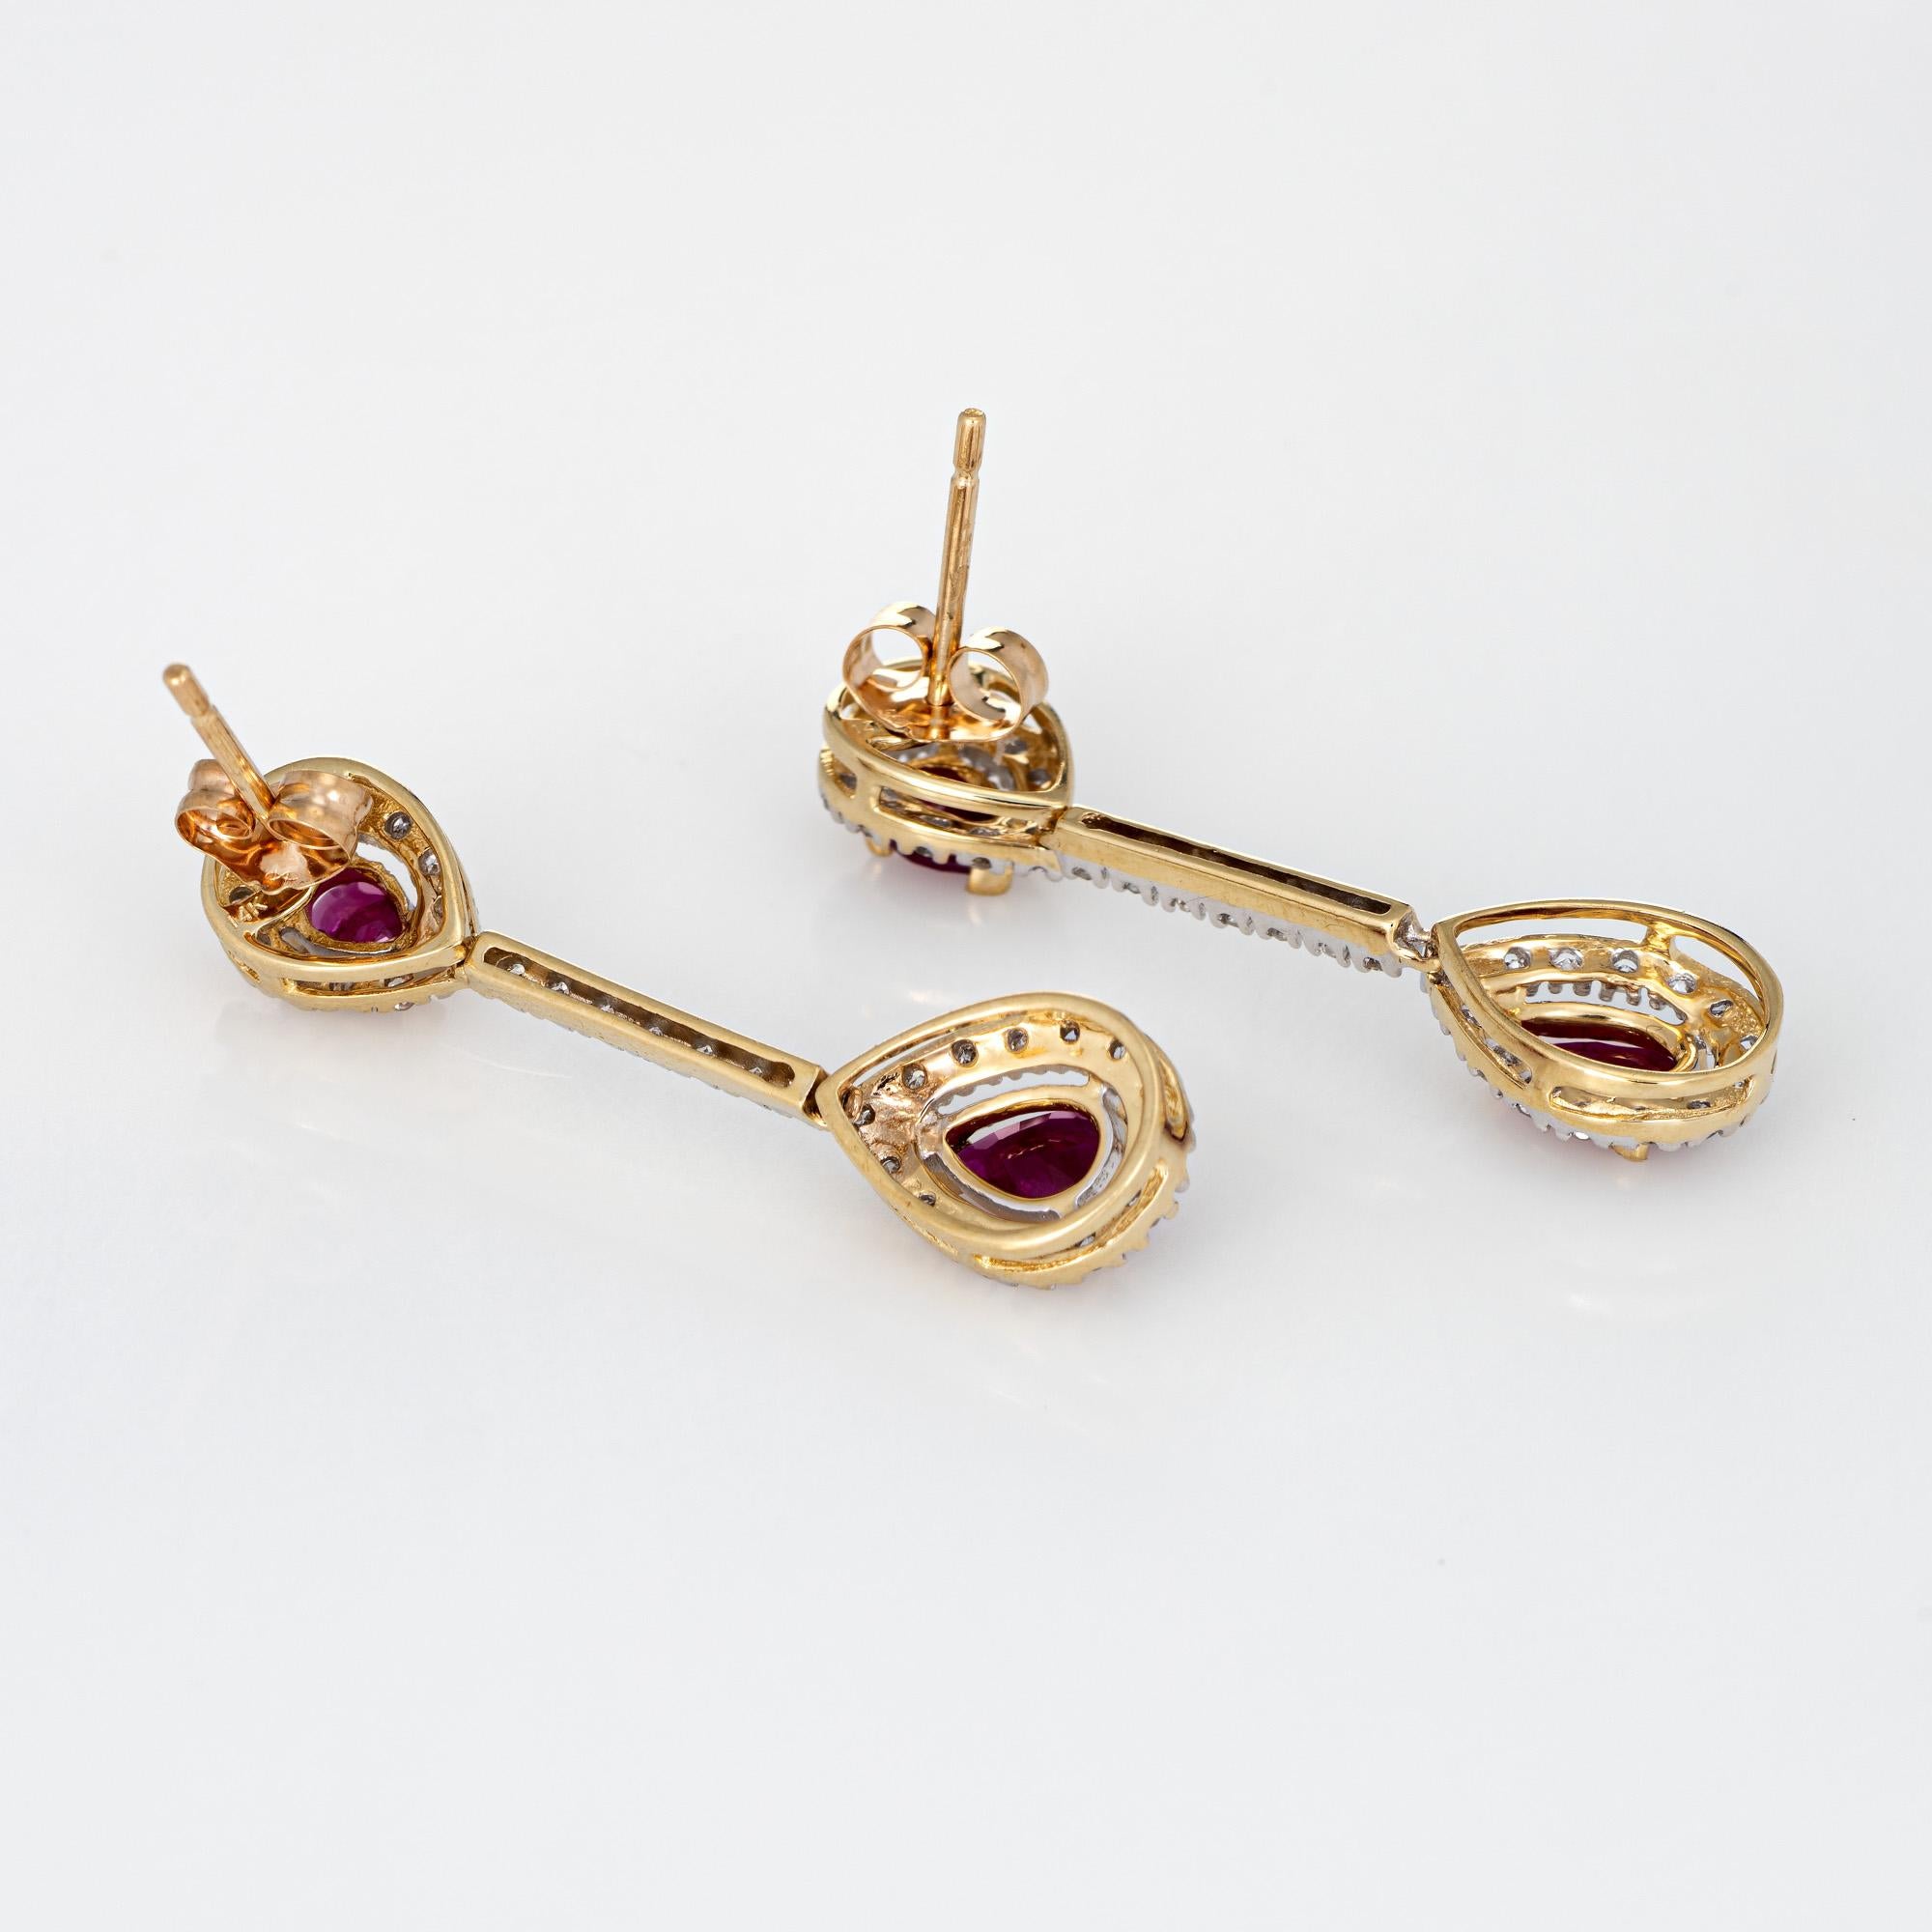 Elegant pair of vintage ruby & diamond earrings crafted in 14k yellow gold. 

Two rubies are estimated at 0.15 carats each (upper) and 0.25 carats each (lower). The rubies total an estimated 0.80 carats. The diamonds total an estimated 0.48 carats